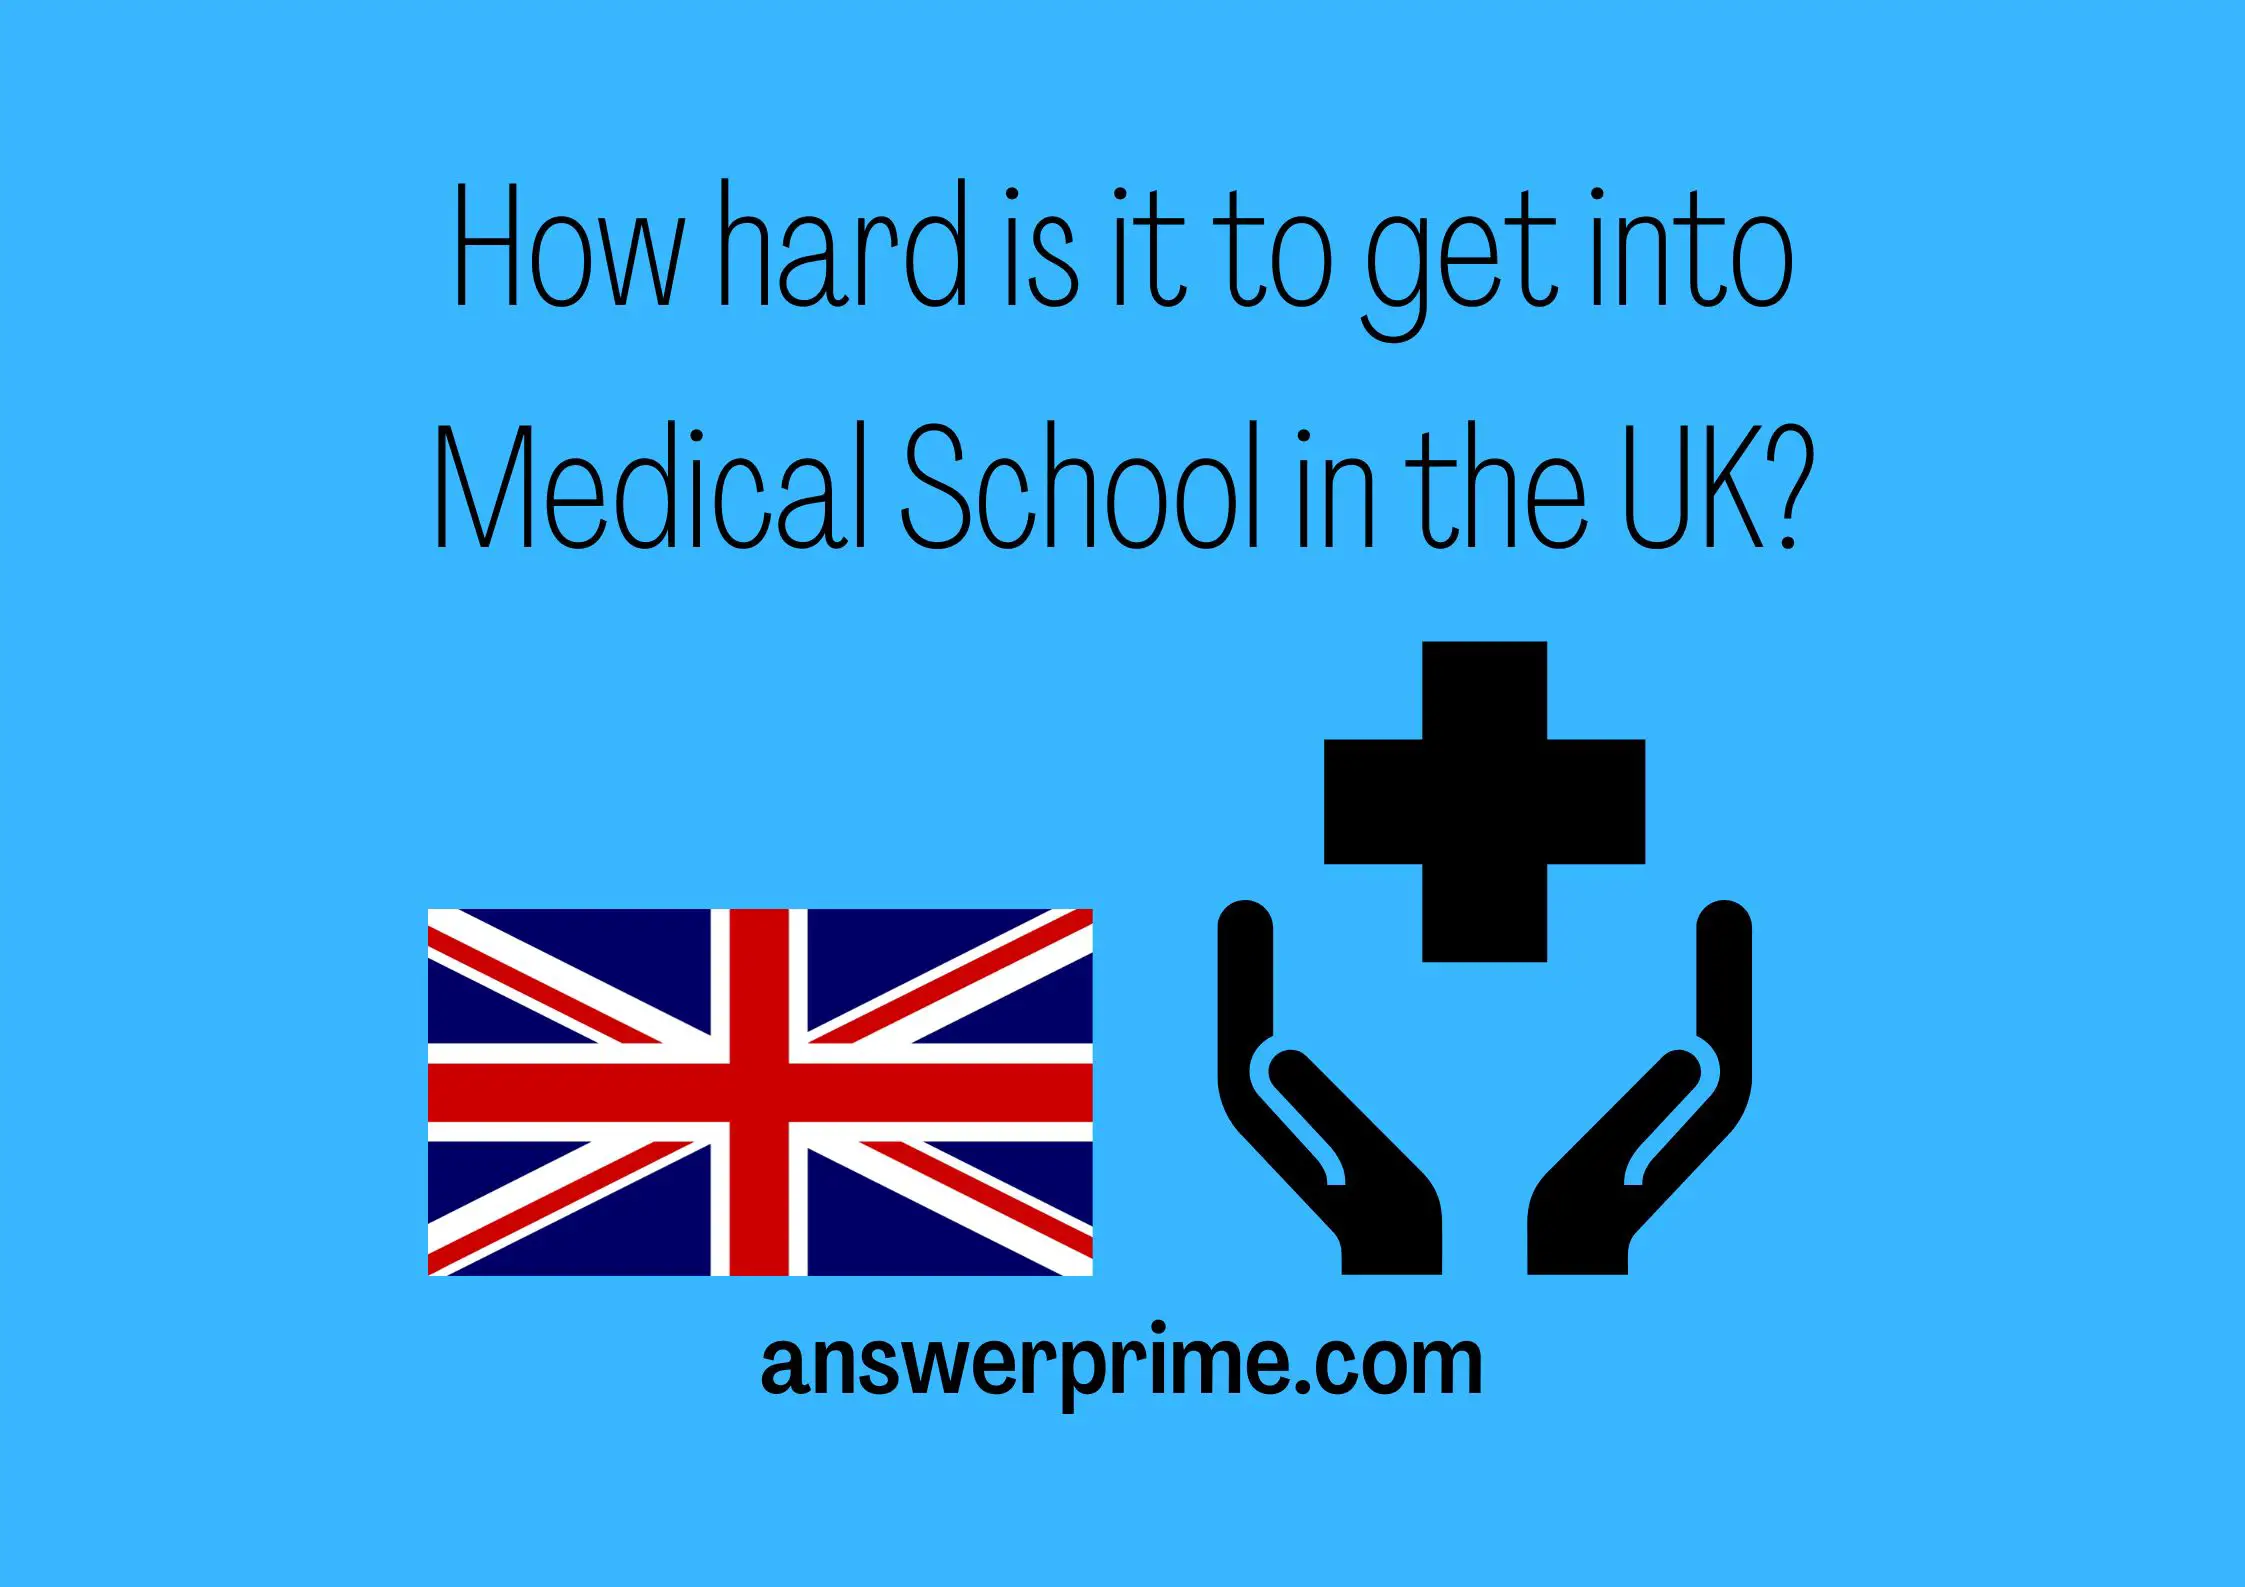 How hard is it to get into Medical School in the UK?